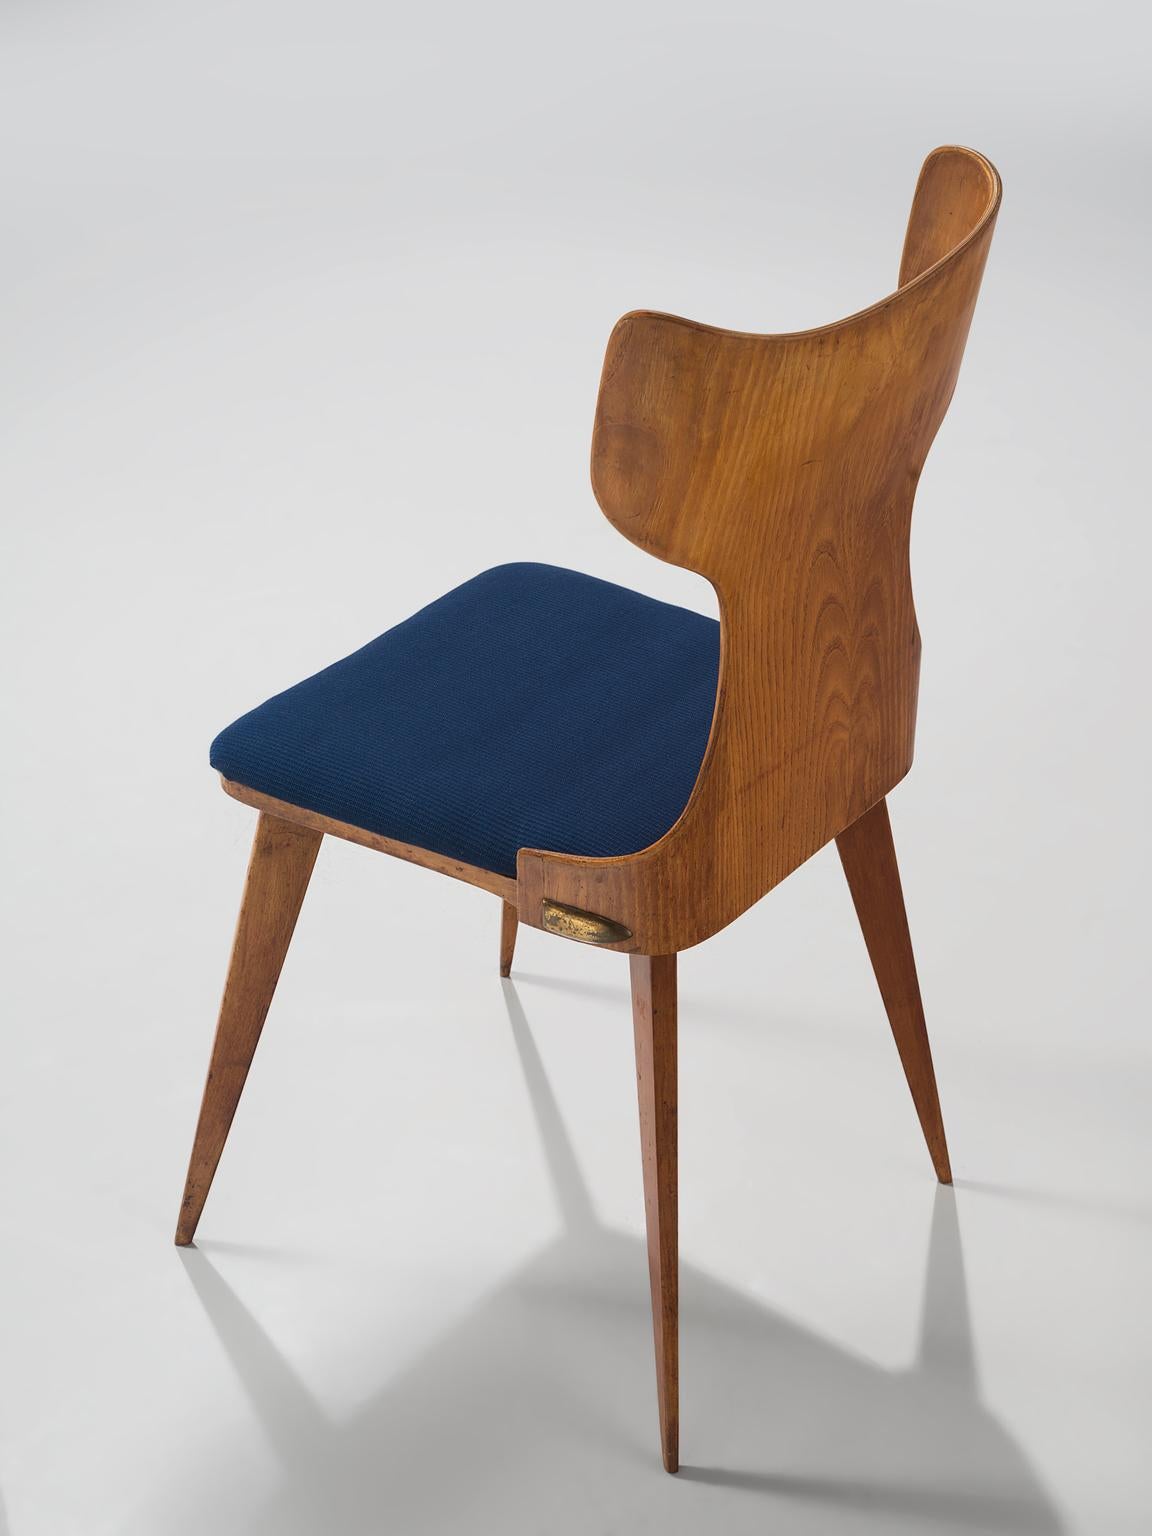 Fabric Carlo Ratti Four Bent Wingback Dining Chairs